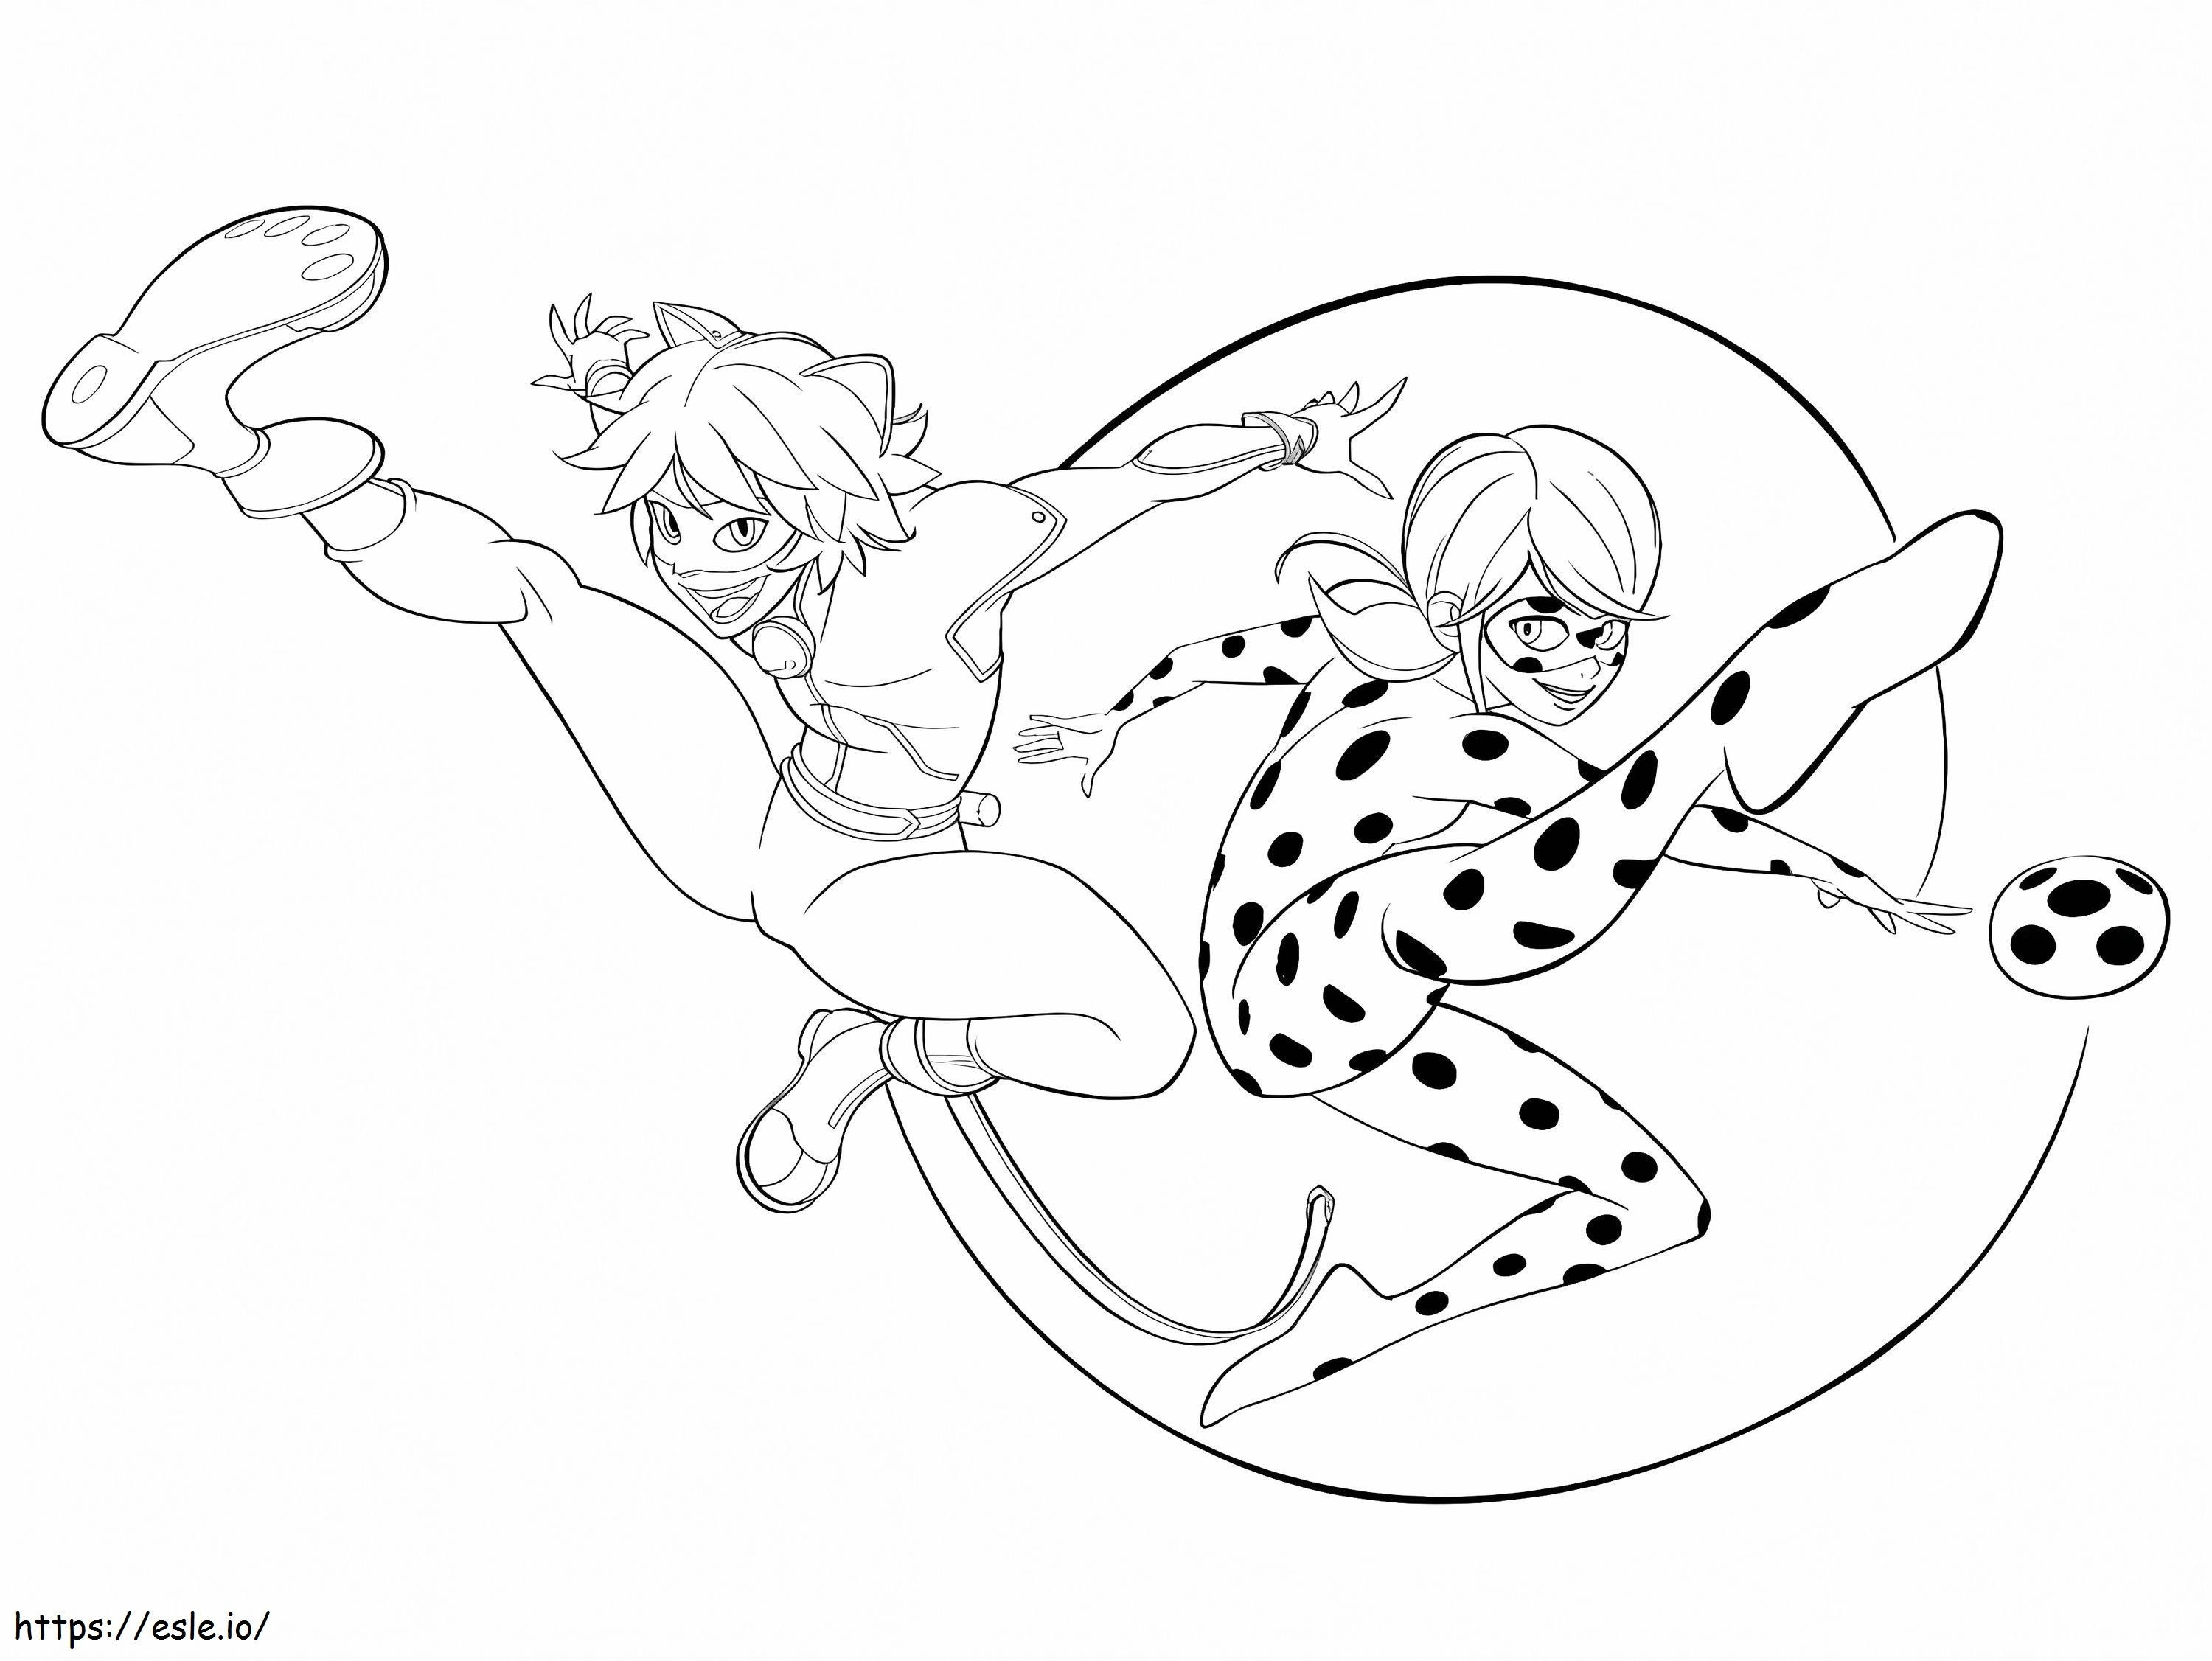 Action Ladybug And Cat Noir coloring page